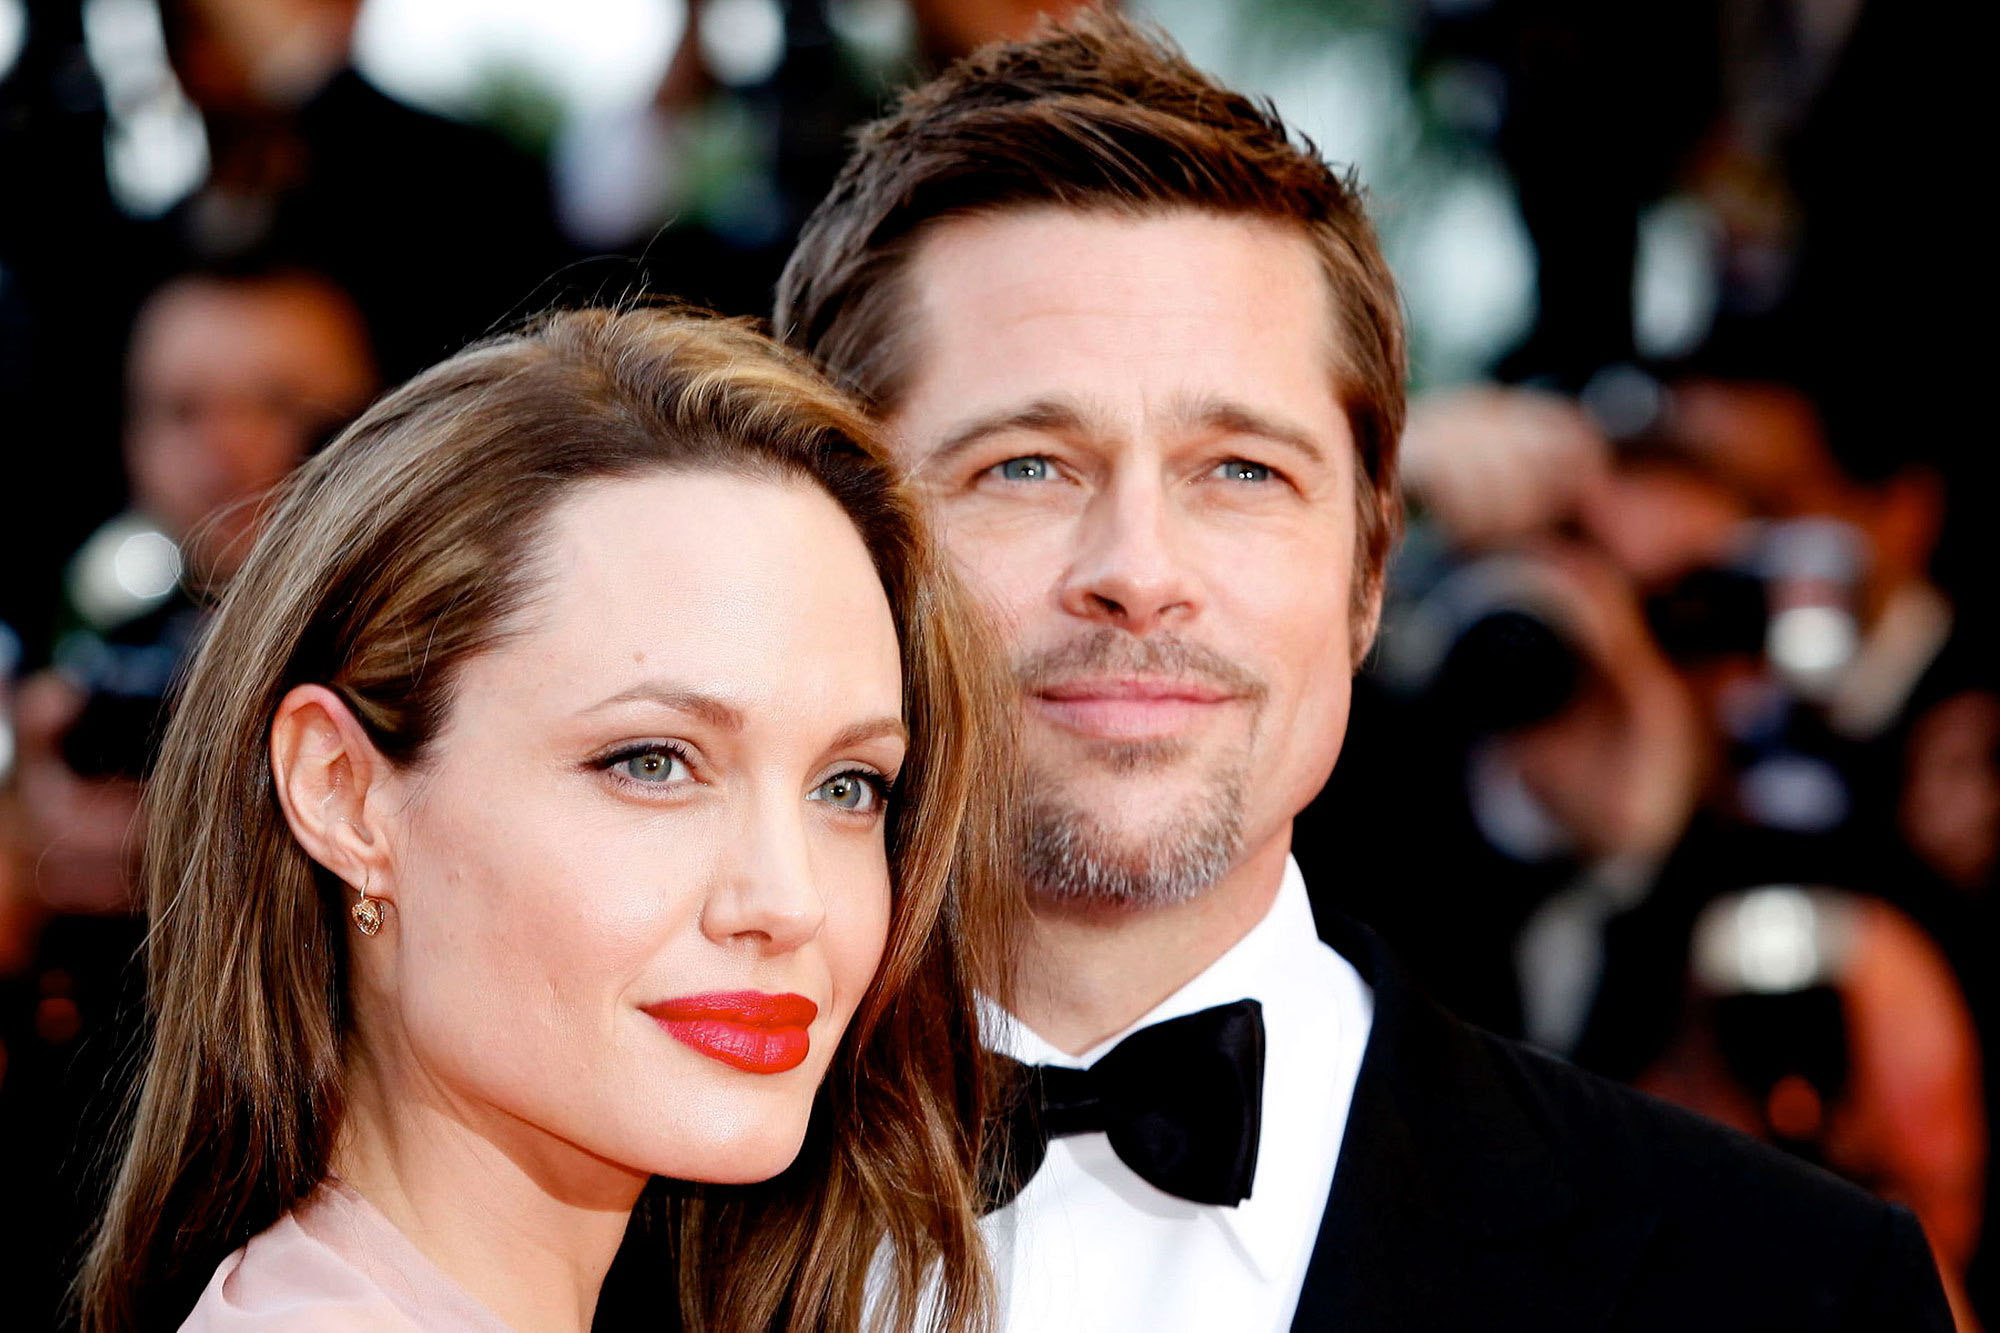 the Lives of angelina jolie mom dad daughter and Brad Pitt